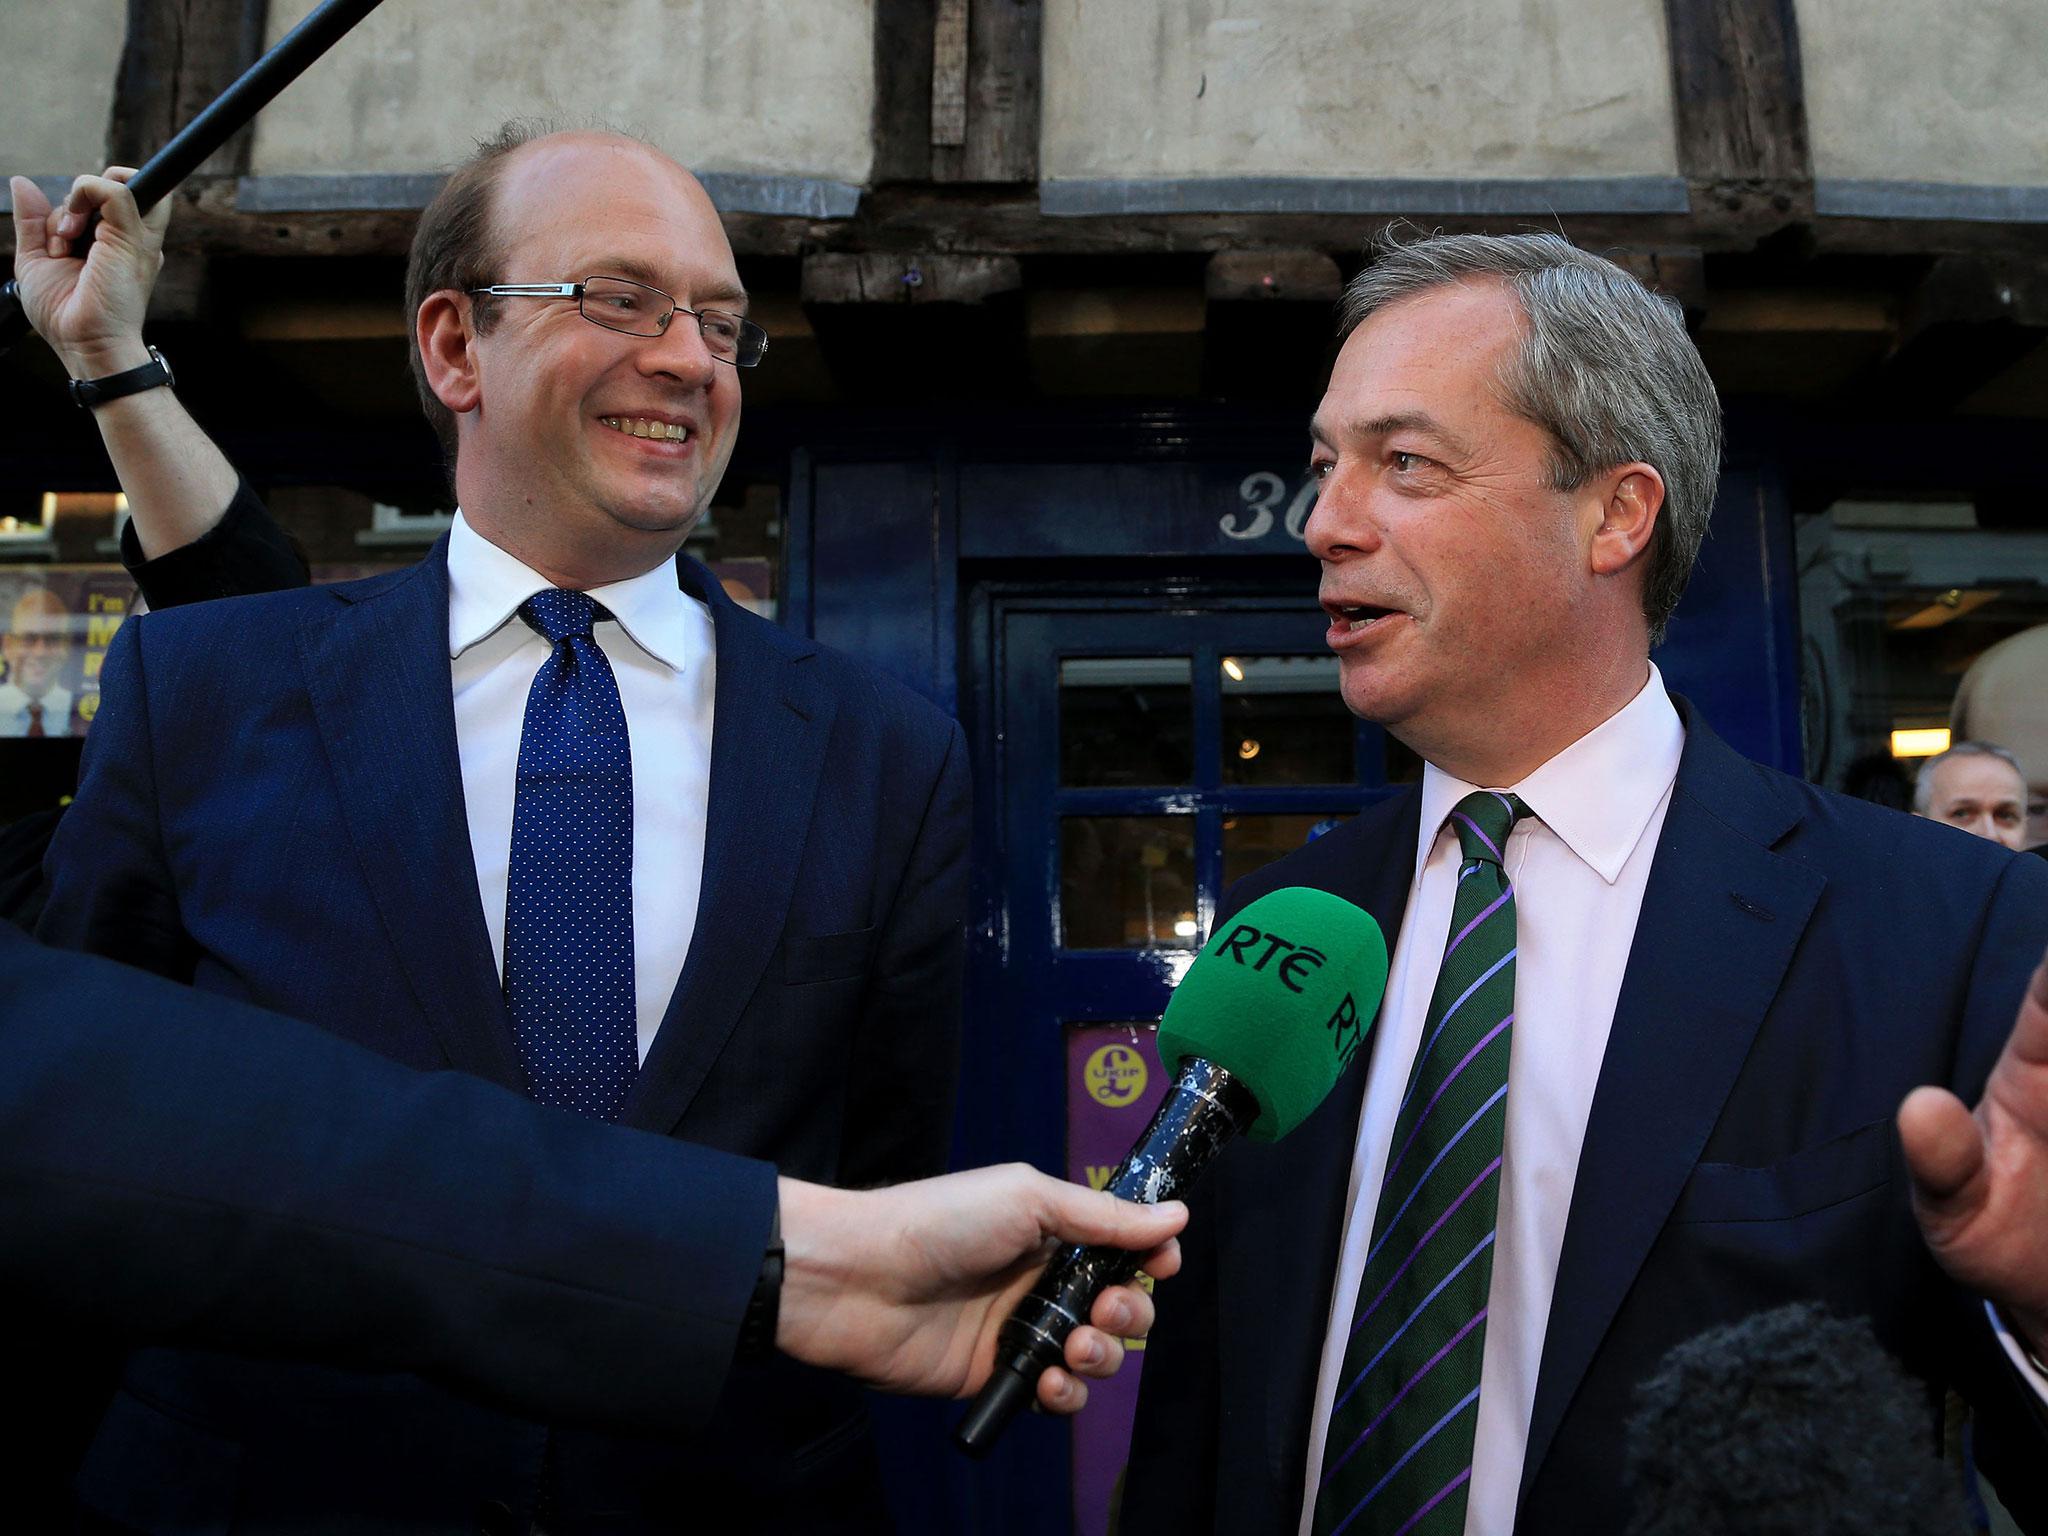 Happier times: Mark Reckless (L) and then-Ukip leader Nigel Farage pictured in April 2015